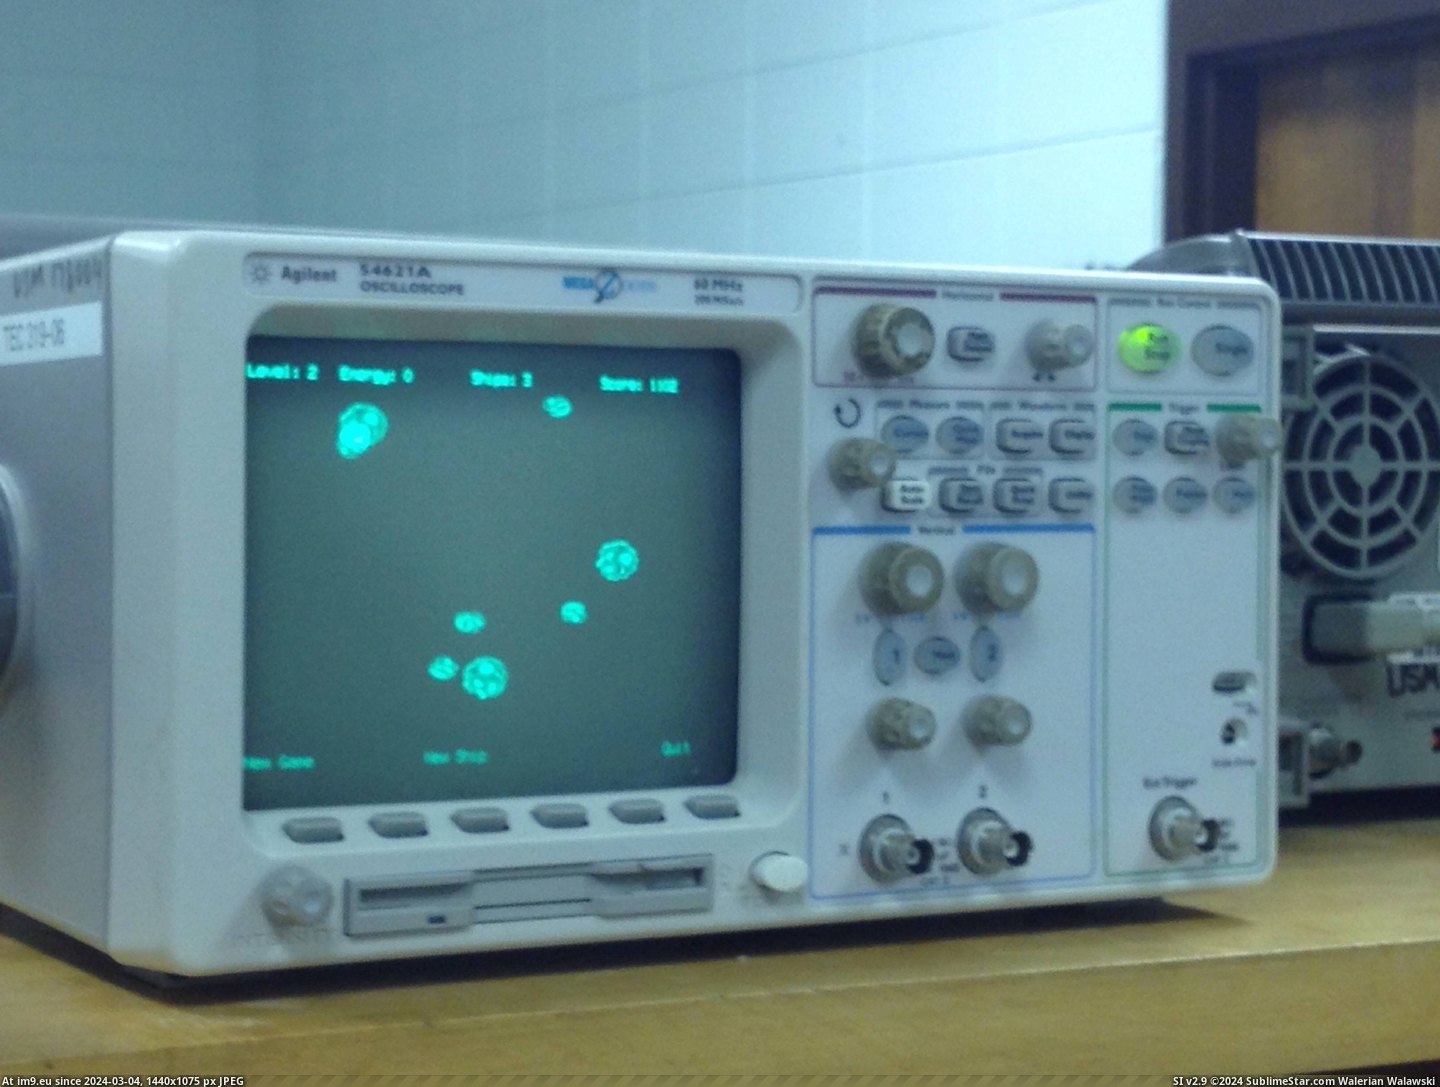 #Gaming #Lab #Oscilloscope #Electronics #Asteroids [Gaming] The Oscilloscope in our Electronics lab came with asteroids Pic. (Bild von album My r/GAMING favs))